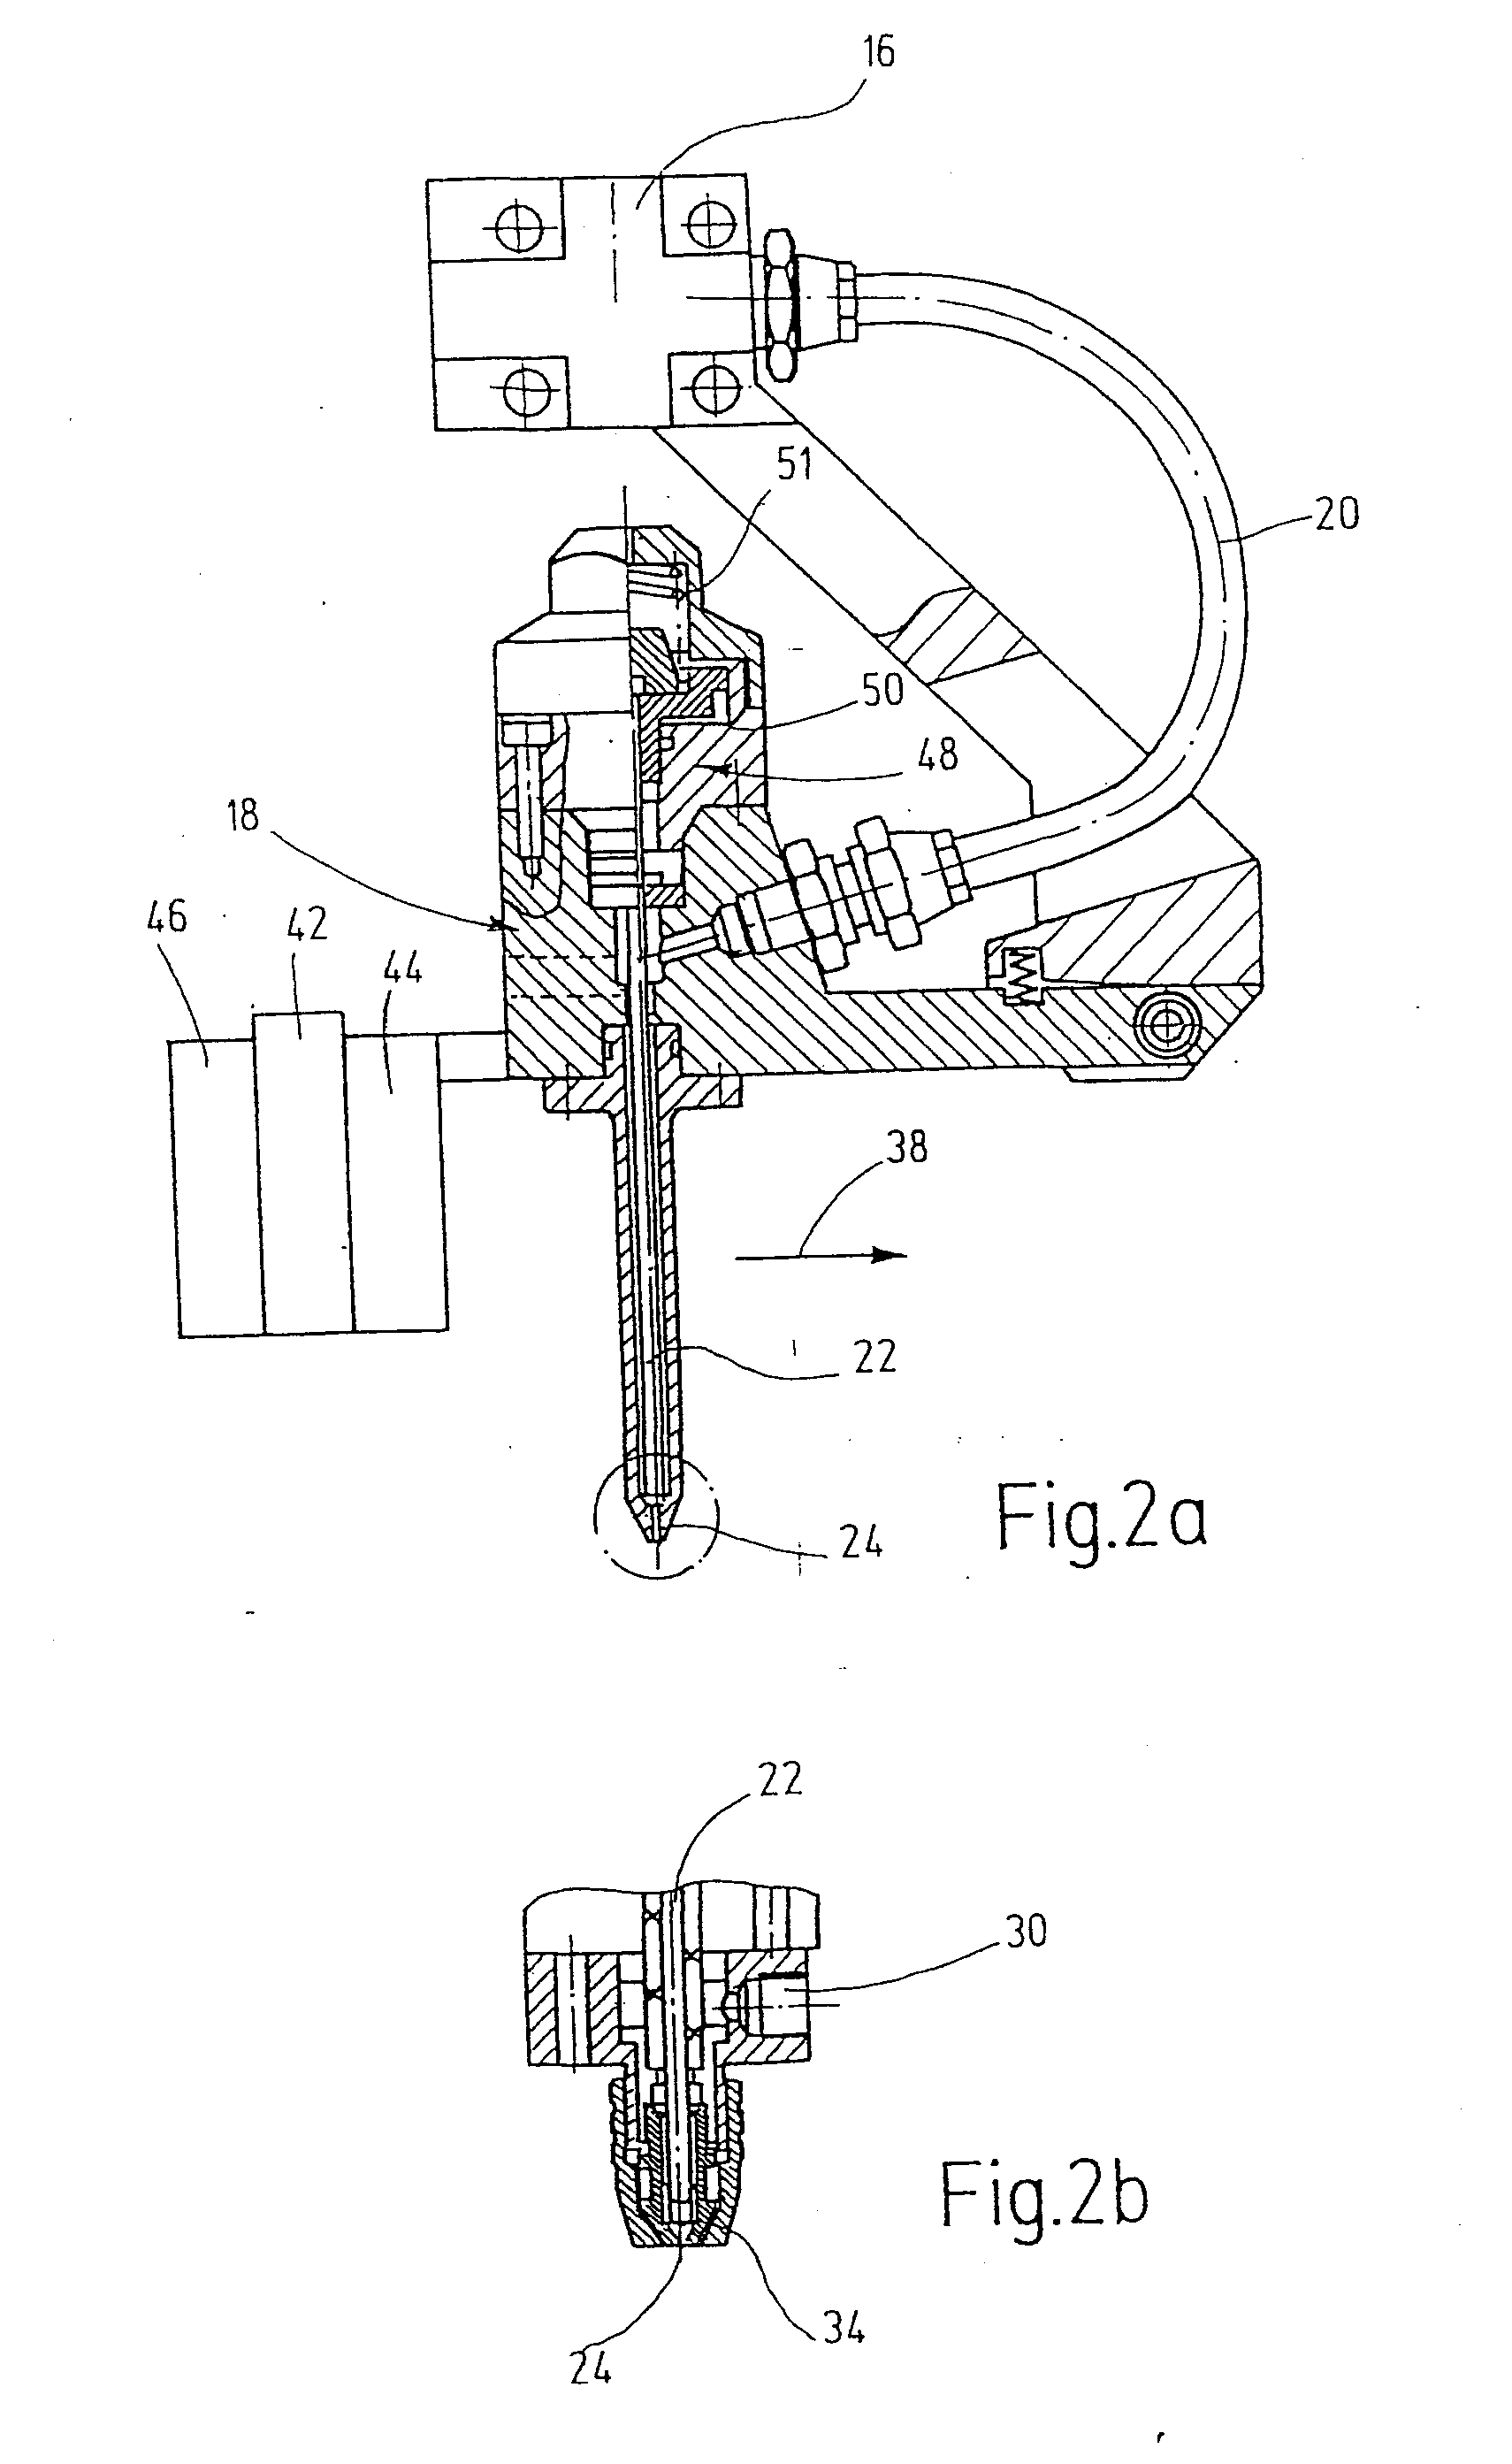 Device for applying adhesive to a workpiece